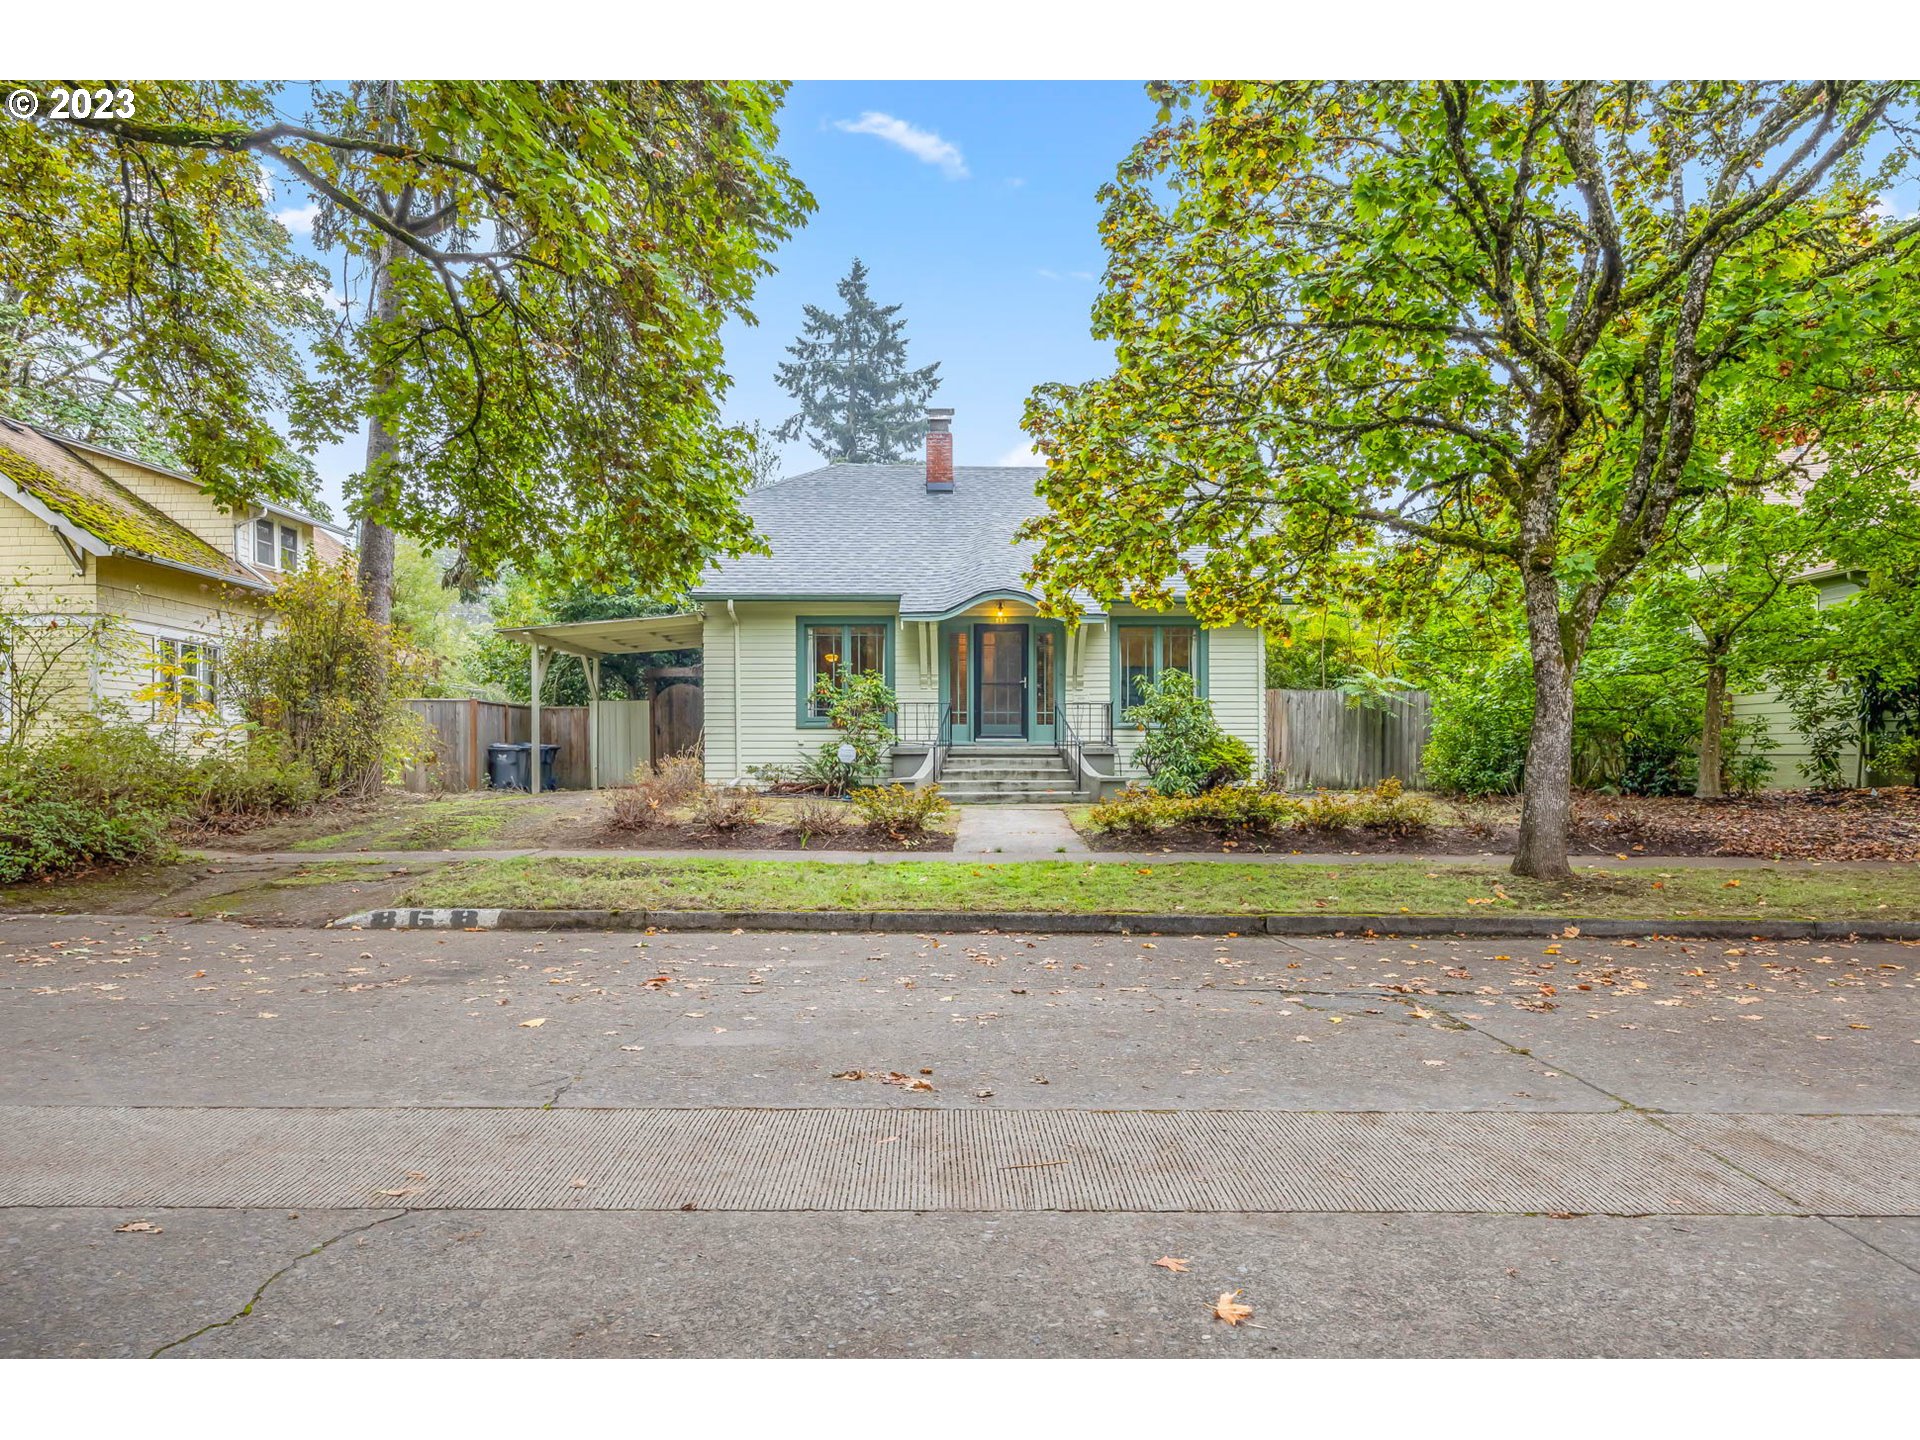 868 W 10TH AVE, Eugene, OR 